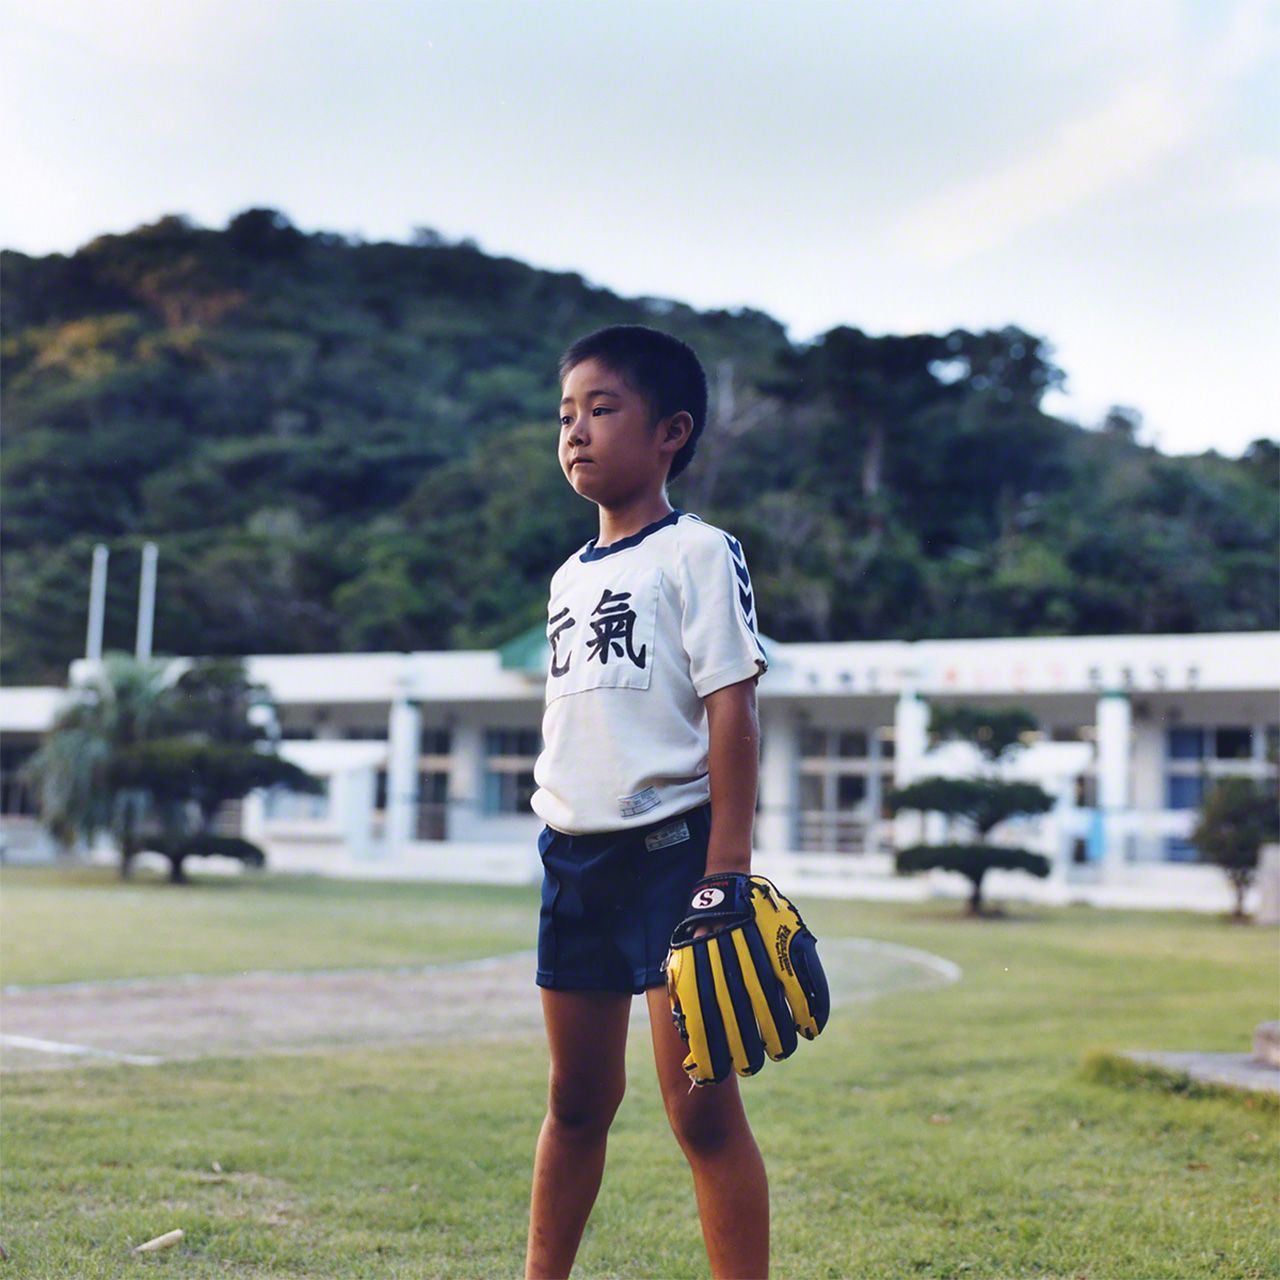 The Funauki district of Iriomotejima has just one elementary student (pictured) and one junior high school student.